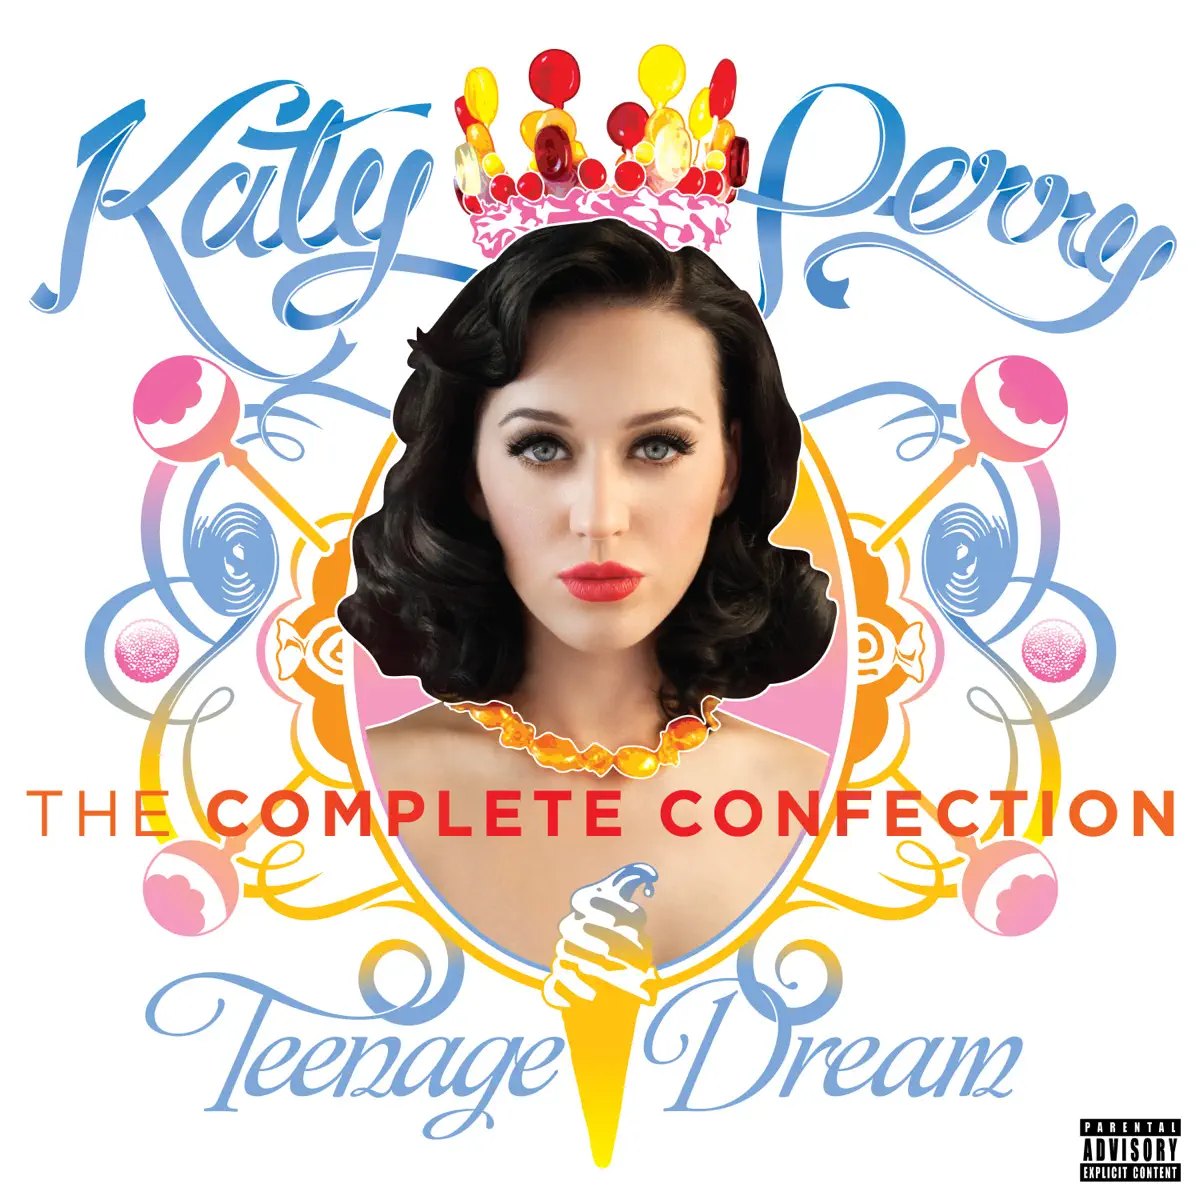 Katy Perry - Teenage Dream: The Complete Confection (2012) [iTunes Plus AAC M4A]-新房子